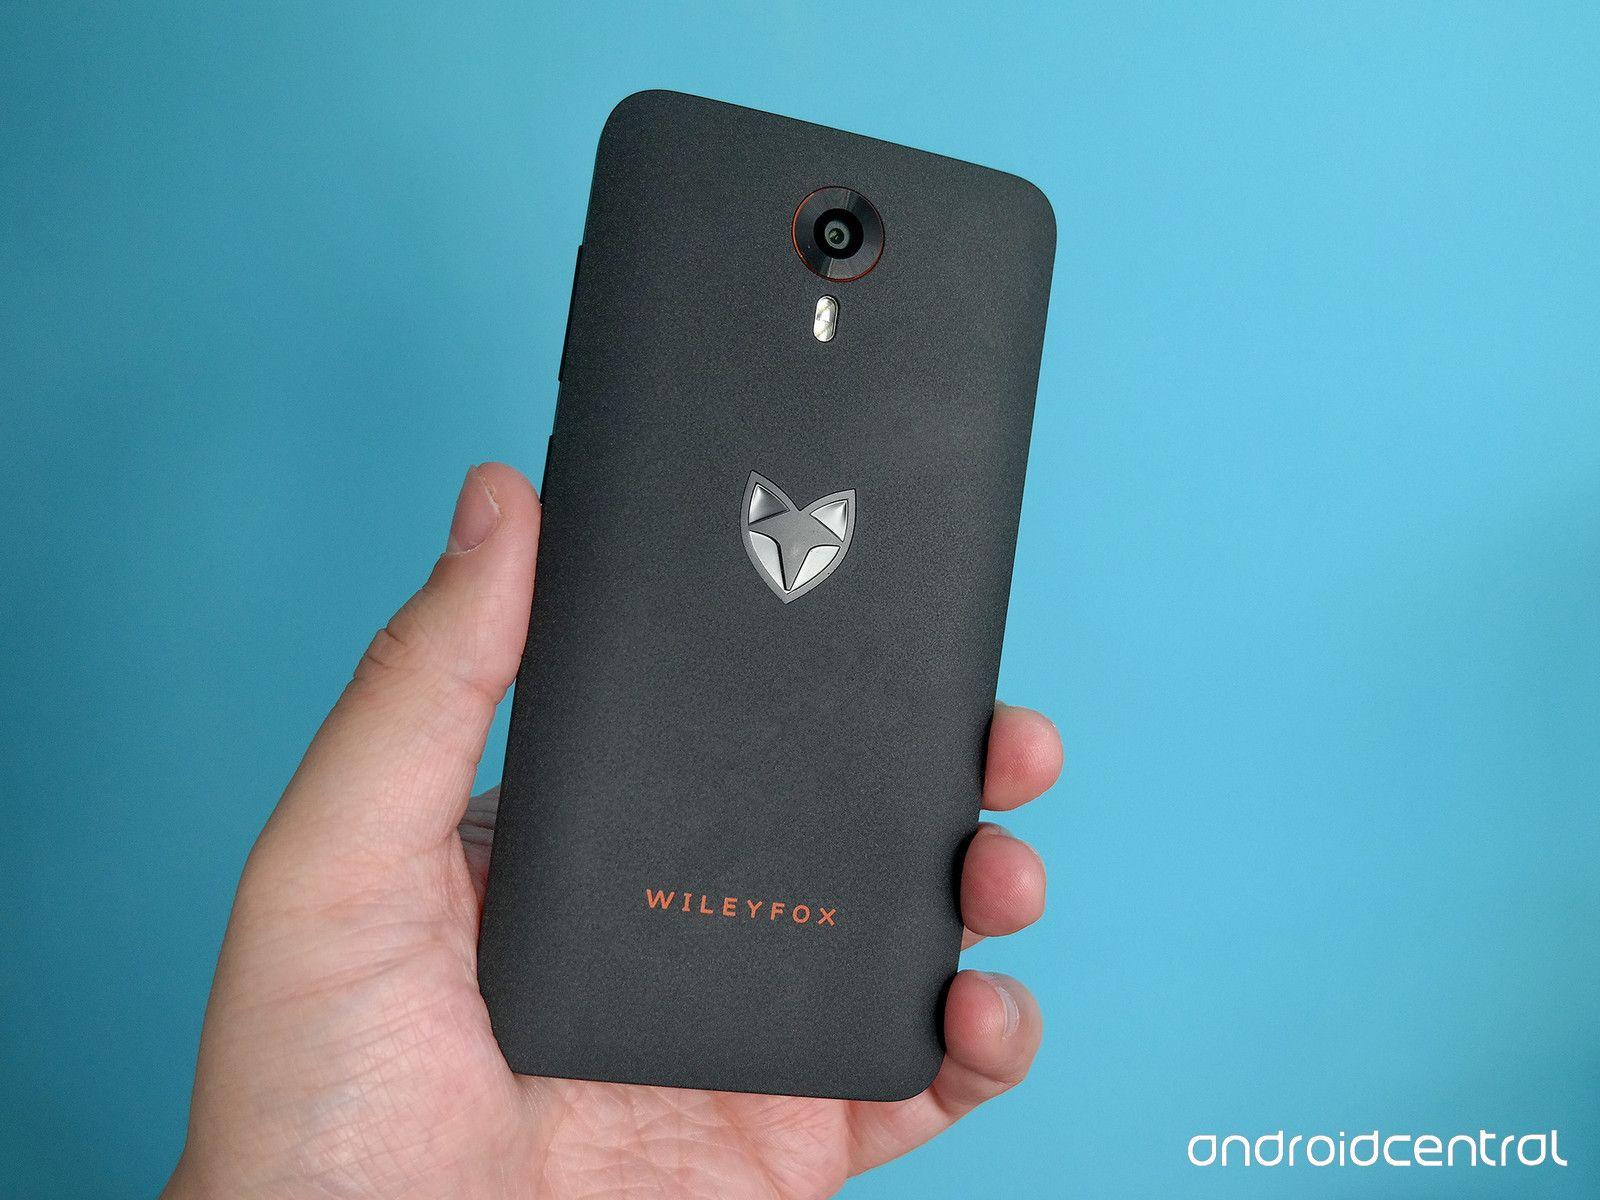 Fox Phone Logo - Wileyfox Swift review | Android Central